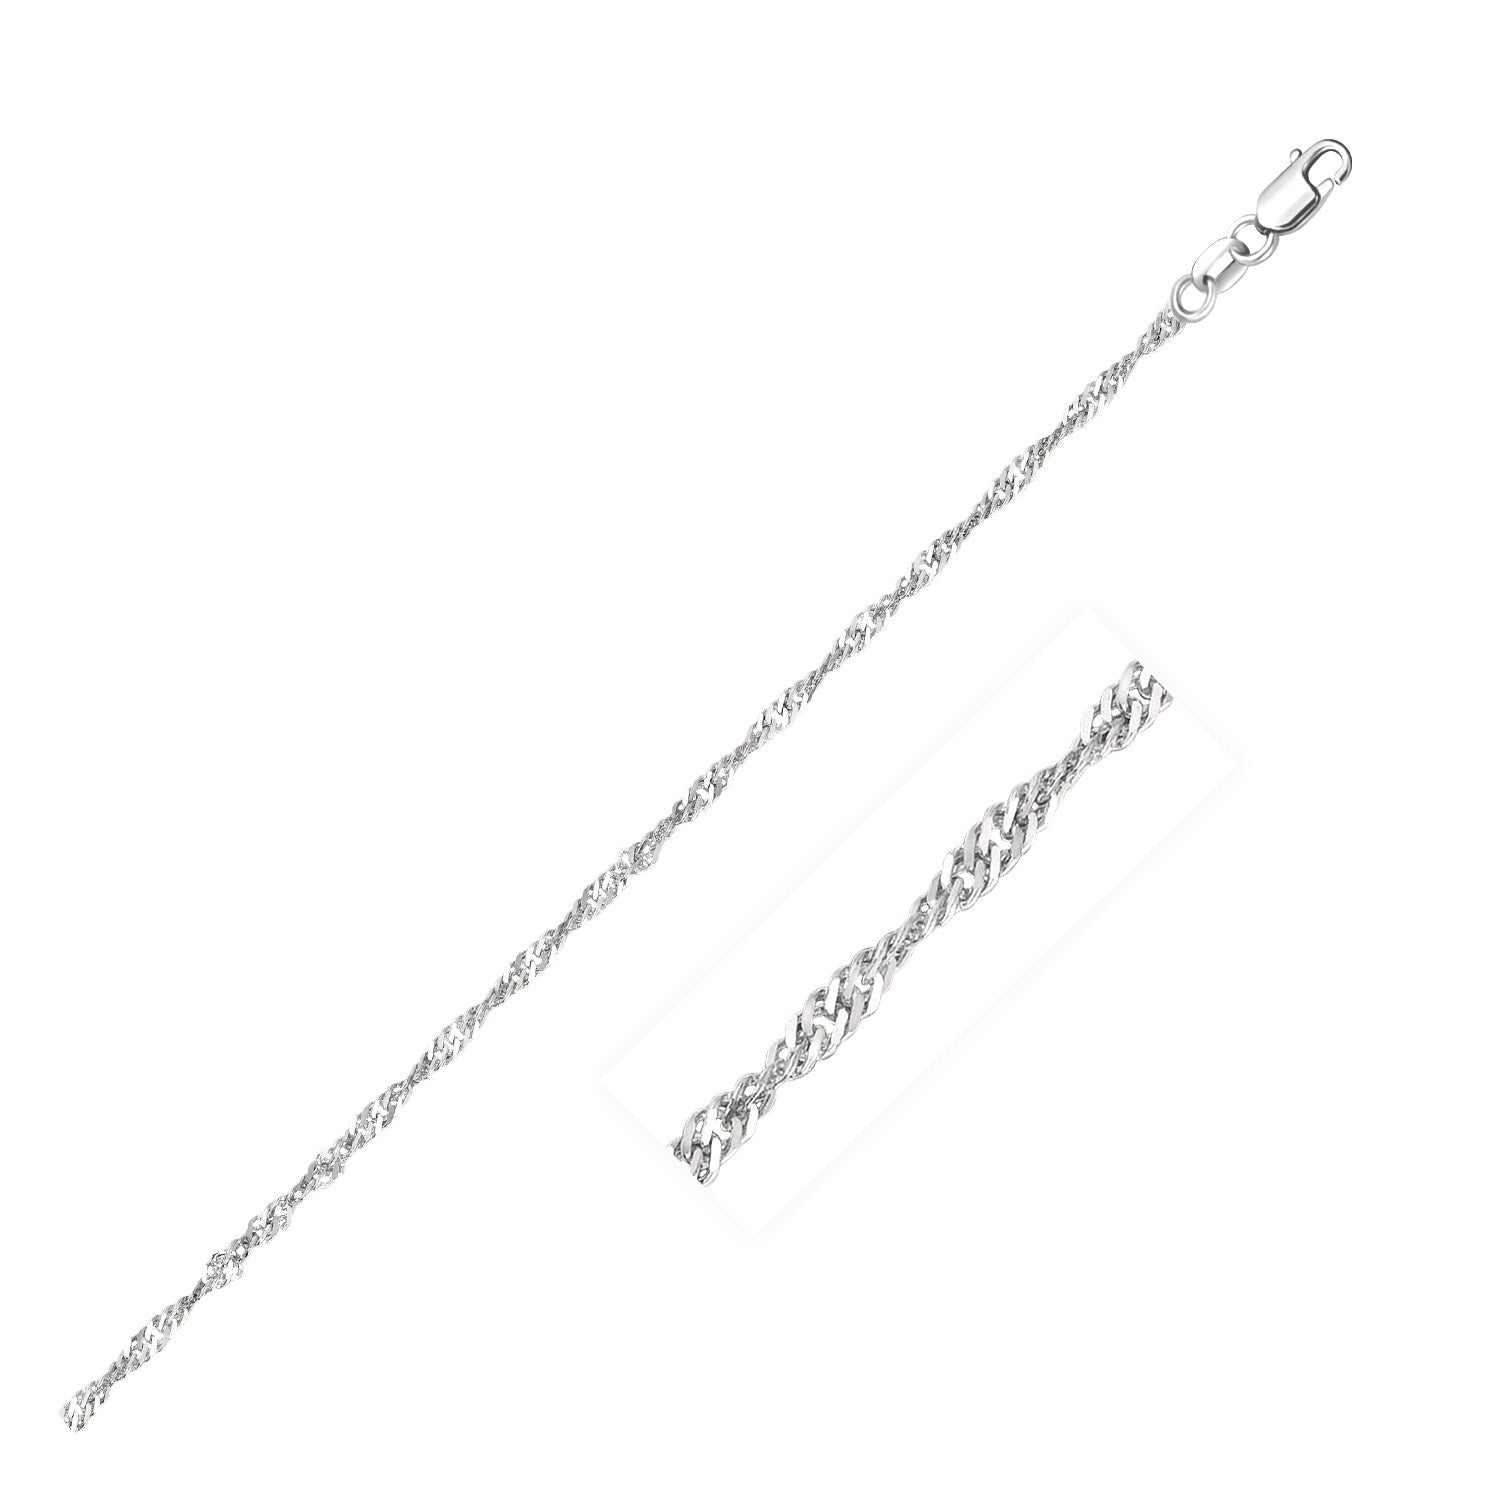 This beautiful, classic women's stylish 14k white gold Singapore chain looks stunning with any outfit. Crafted from 14K white gold, it will add a touch of class and elegance to any ensemble. Its 1.7mm chain width is delicate, yet sturdy, making it perfect for everyday wear. Showcase your style with this timeless Singapore chain!